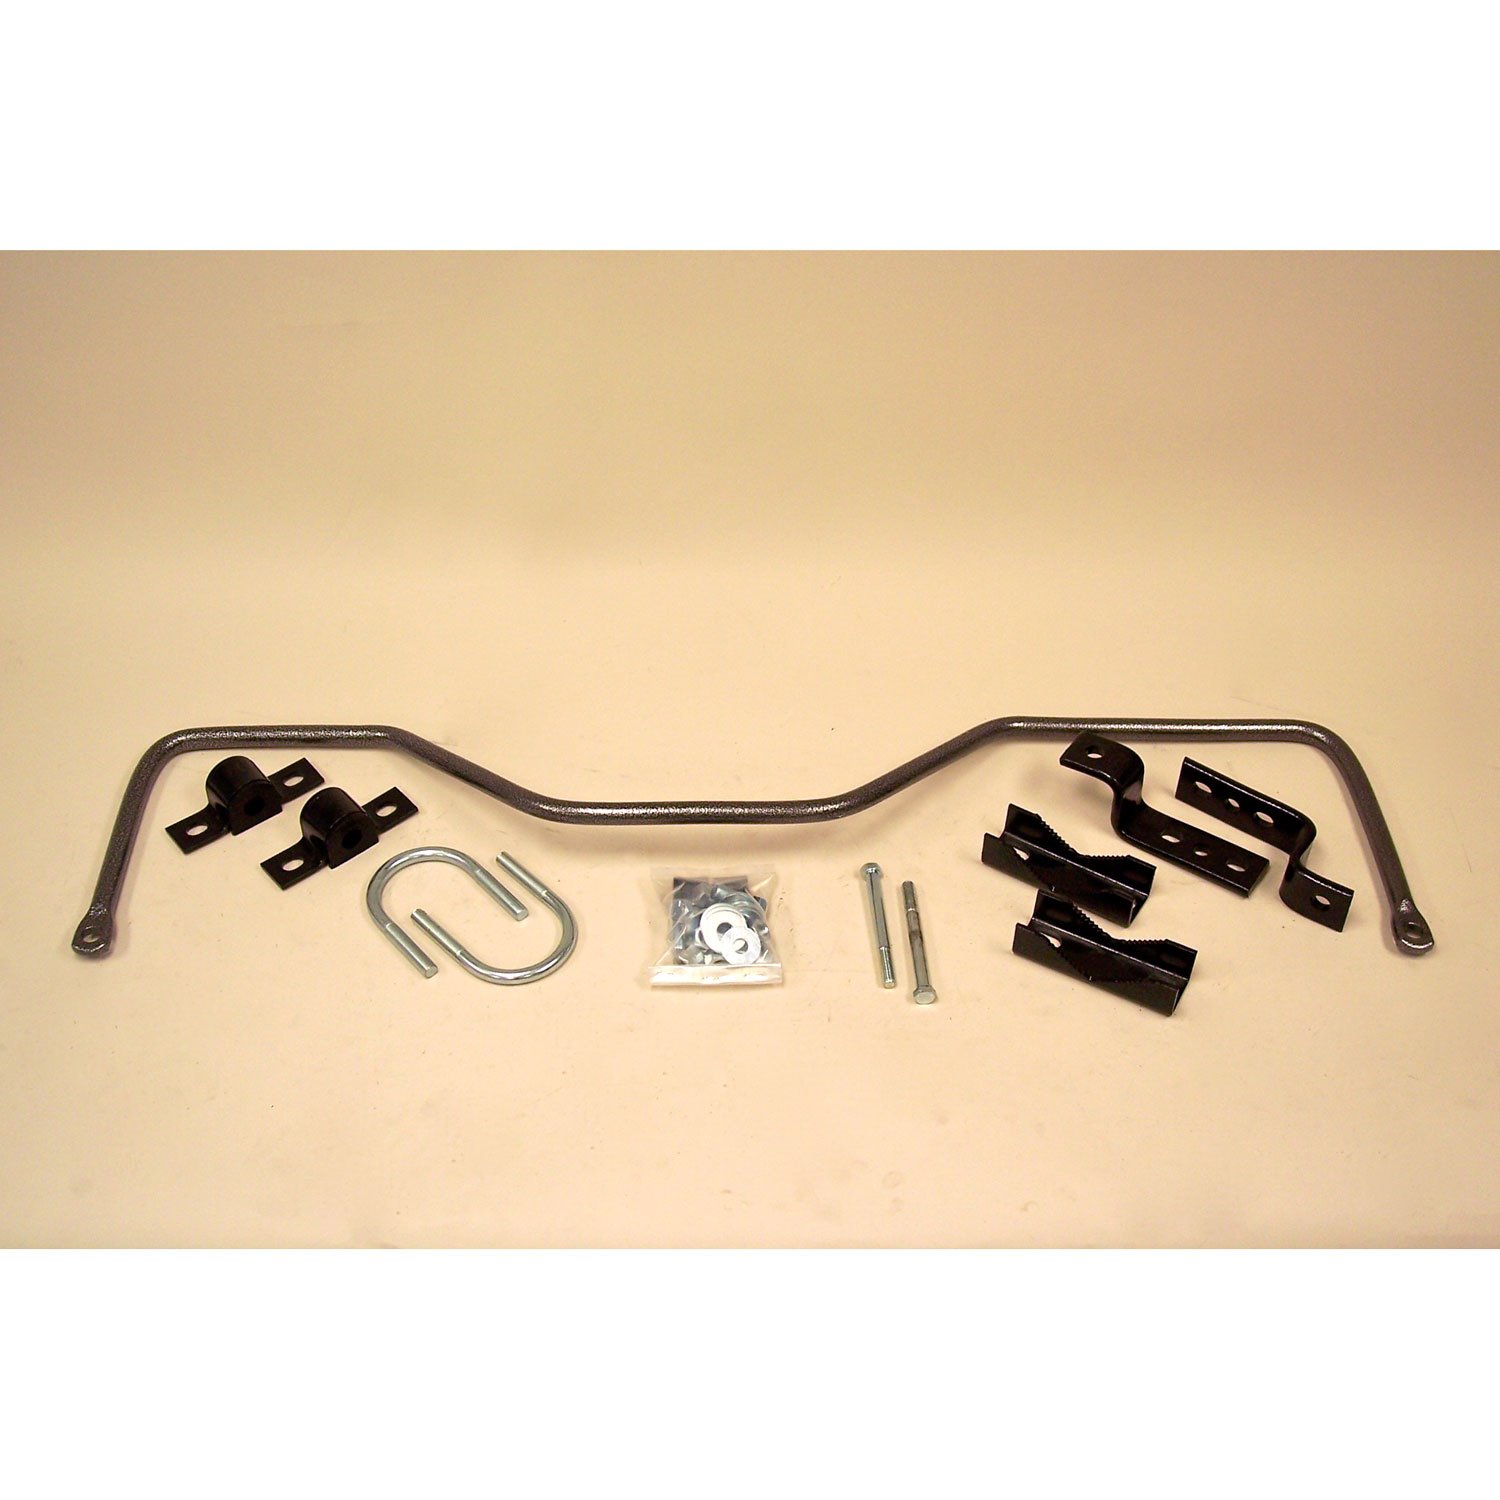 Rear Sway Bar for 1986-2005 Chevy Astro and GMC Safari